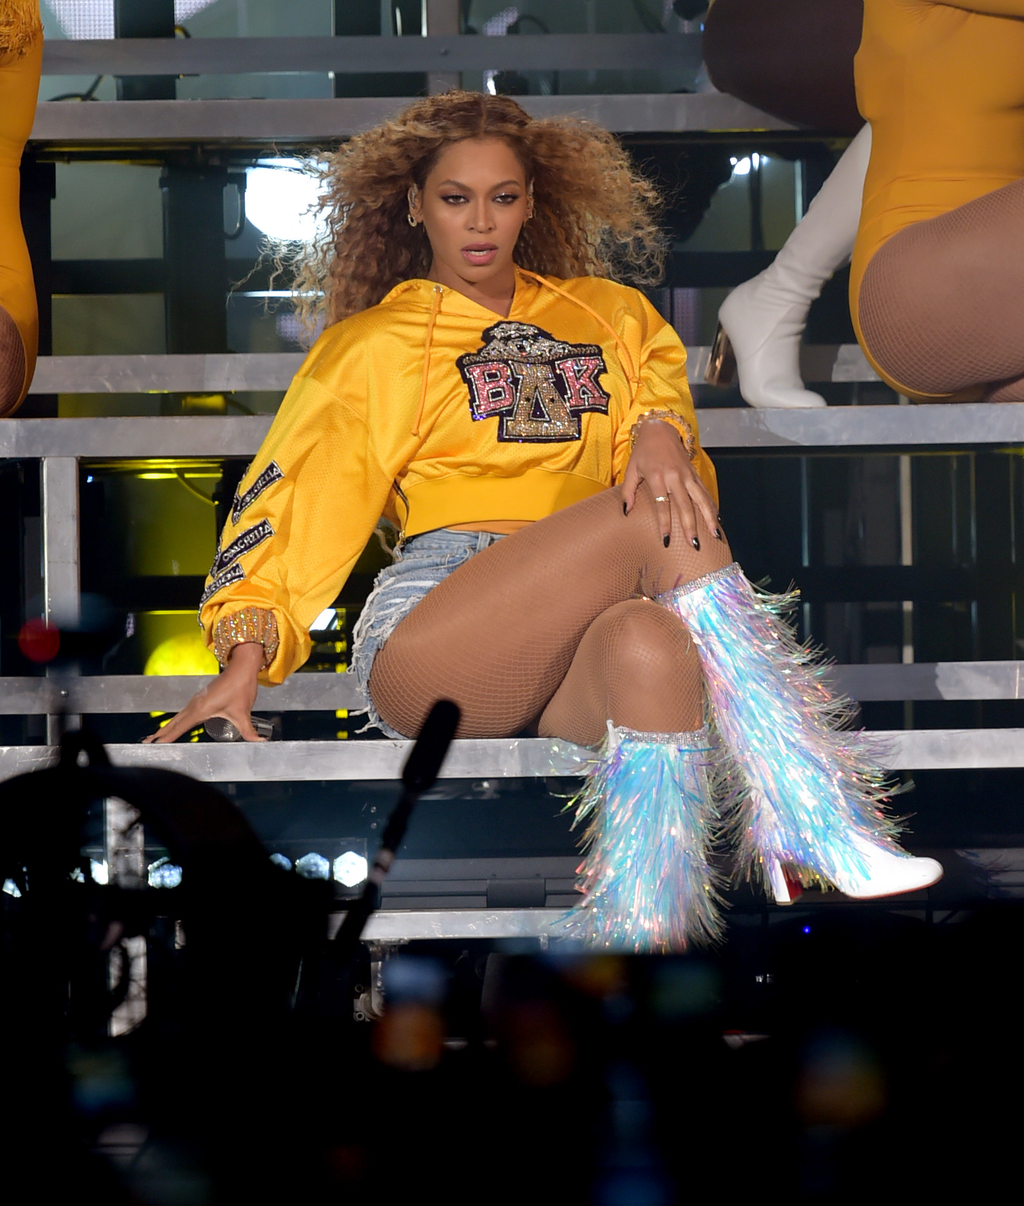 Beyoncé-galéria INDIO, CA - APRIL 14: Beyonce Knowles performs onstage during 2018 Coachella Valley Music And Arts Festival Weekend 1 at the Empire Polo Field on April 14, 2018 in Indio, California.   Kevin Winter/Getty Images for Coachella/AFP 